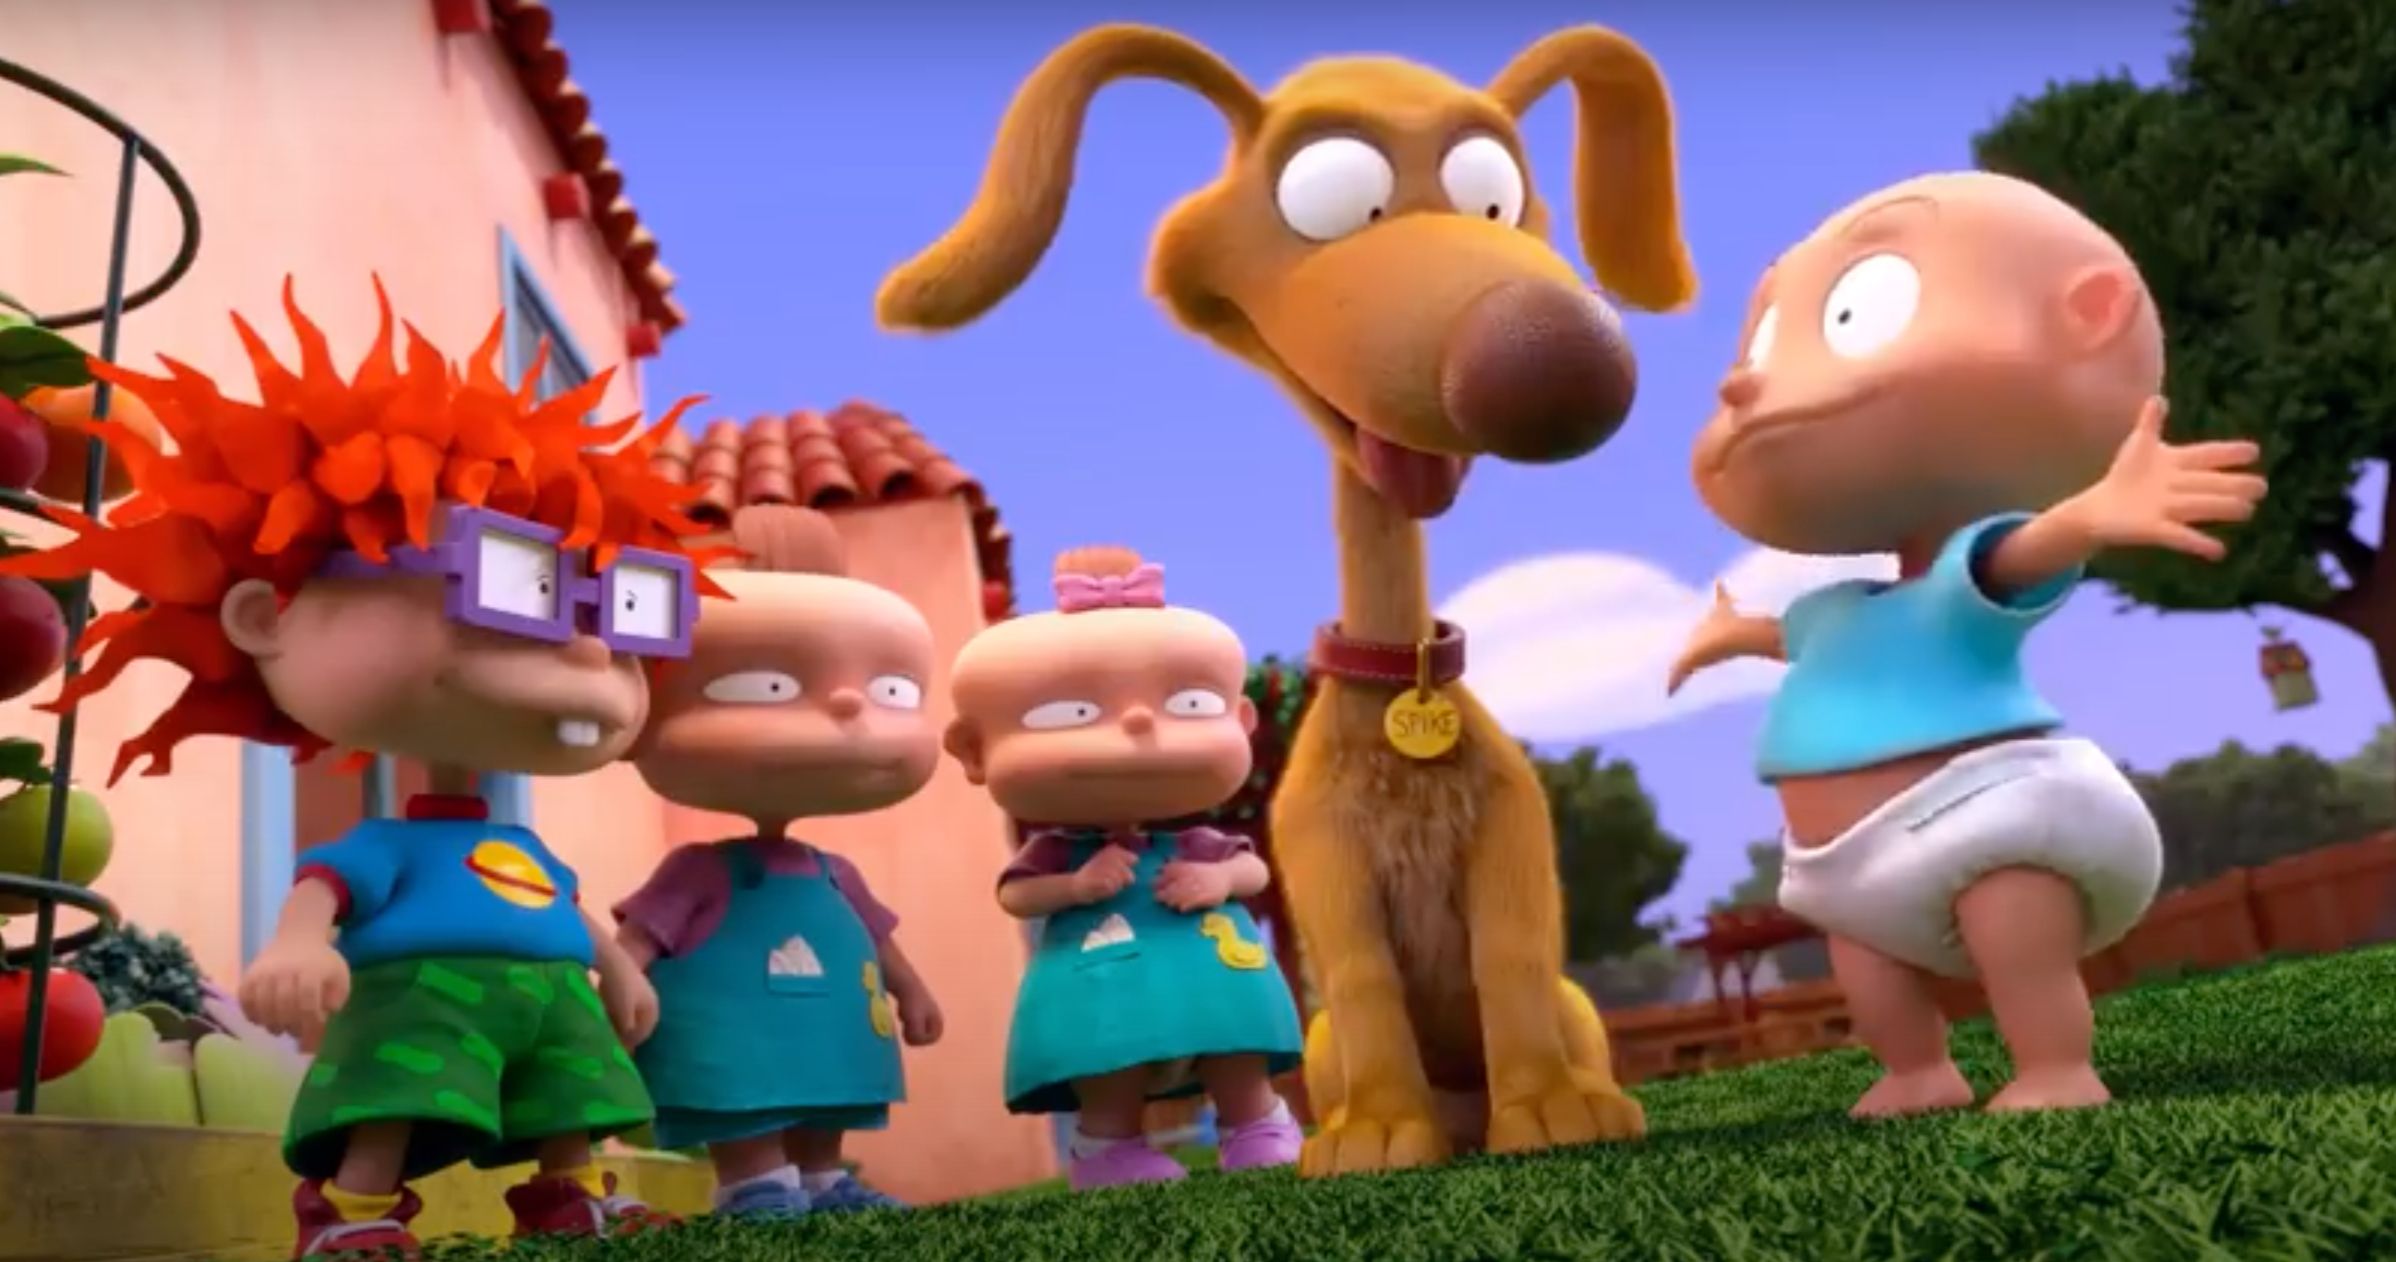 Rugrats Reboot Trailer Arrives Ahead Of Paramount Debut Later This Month